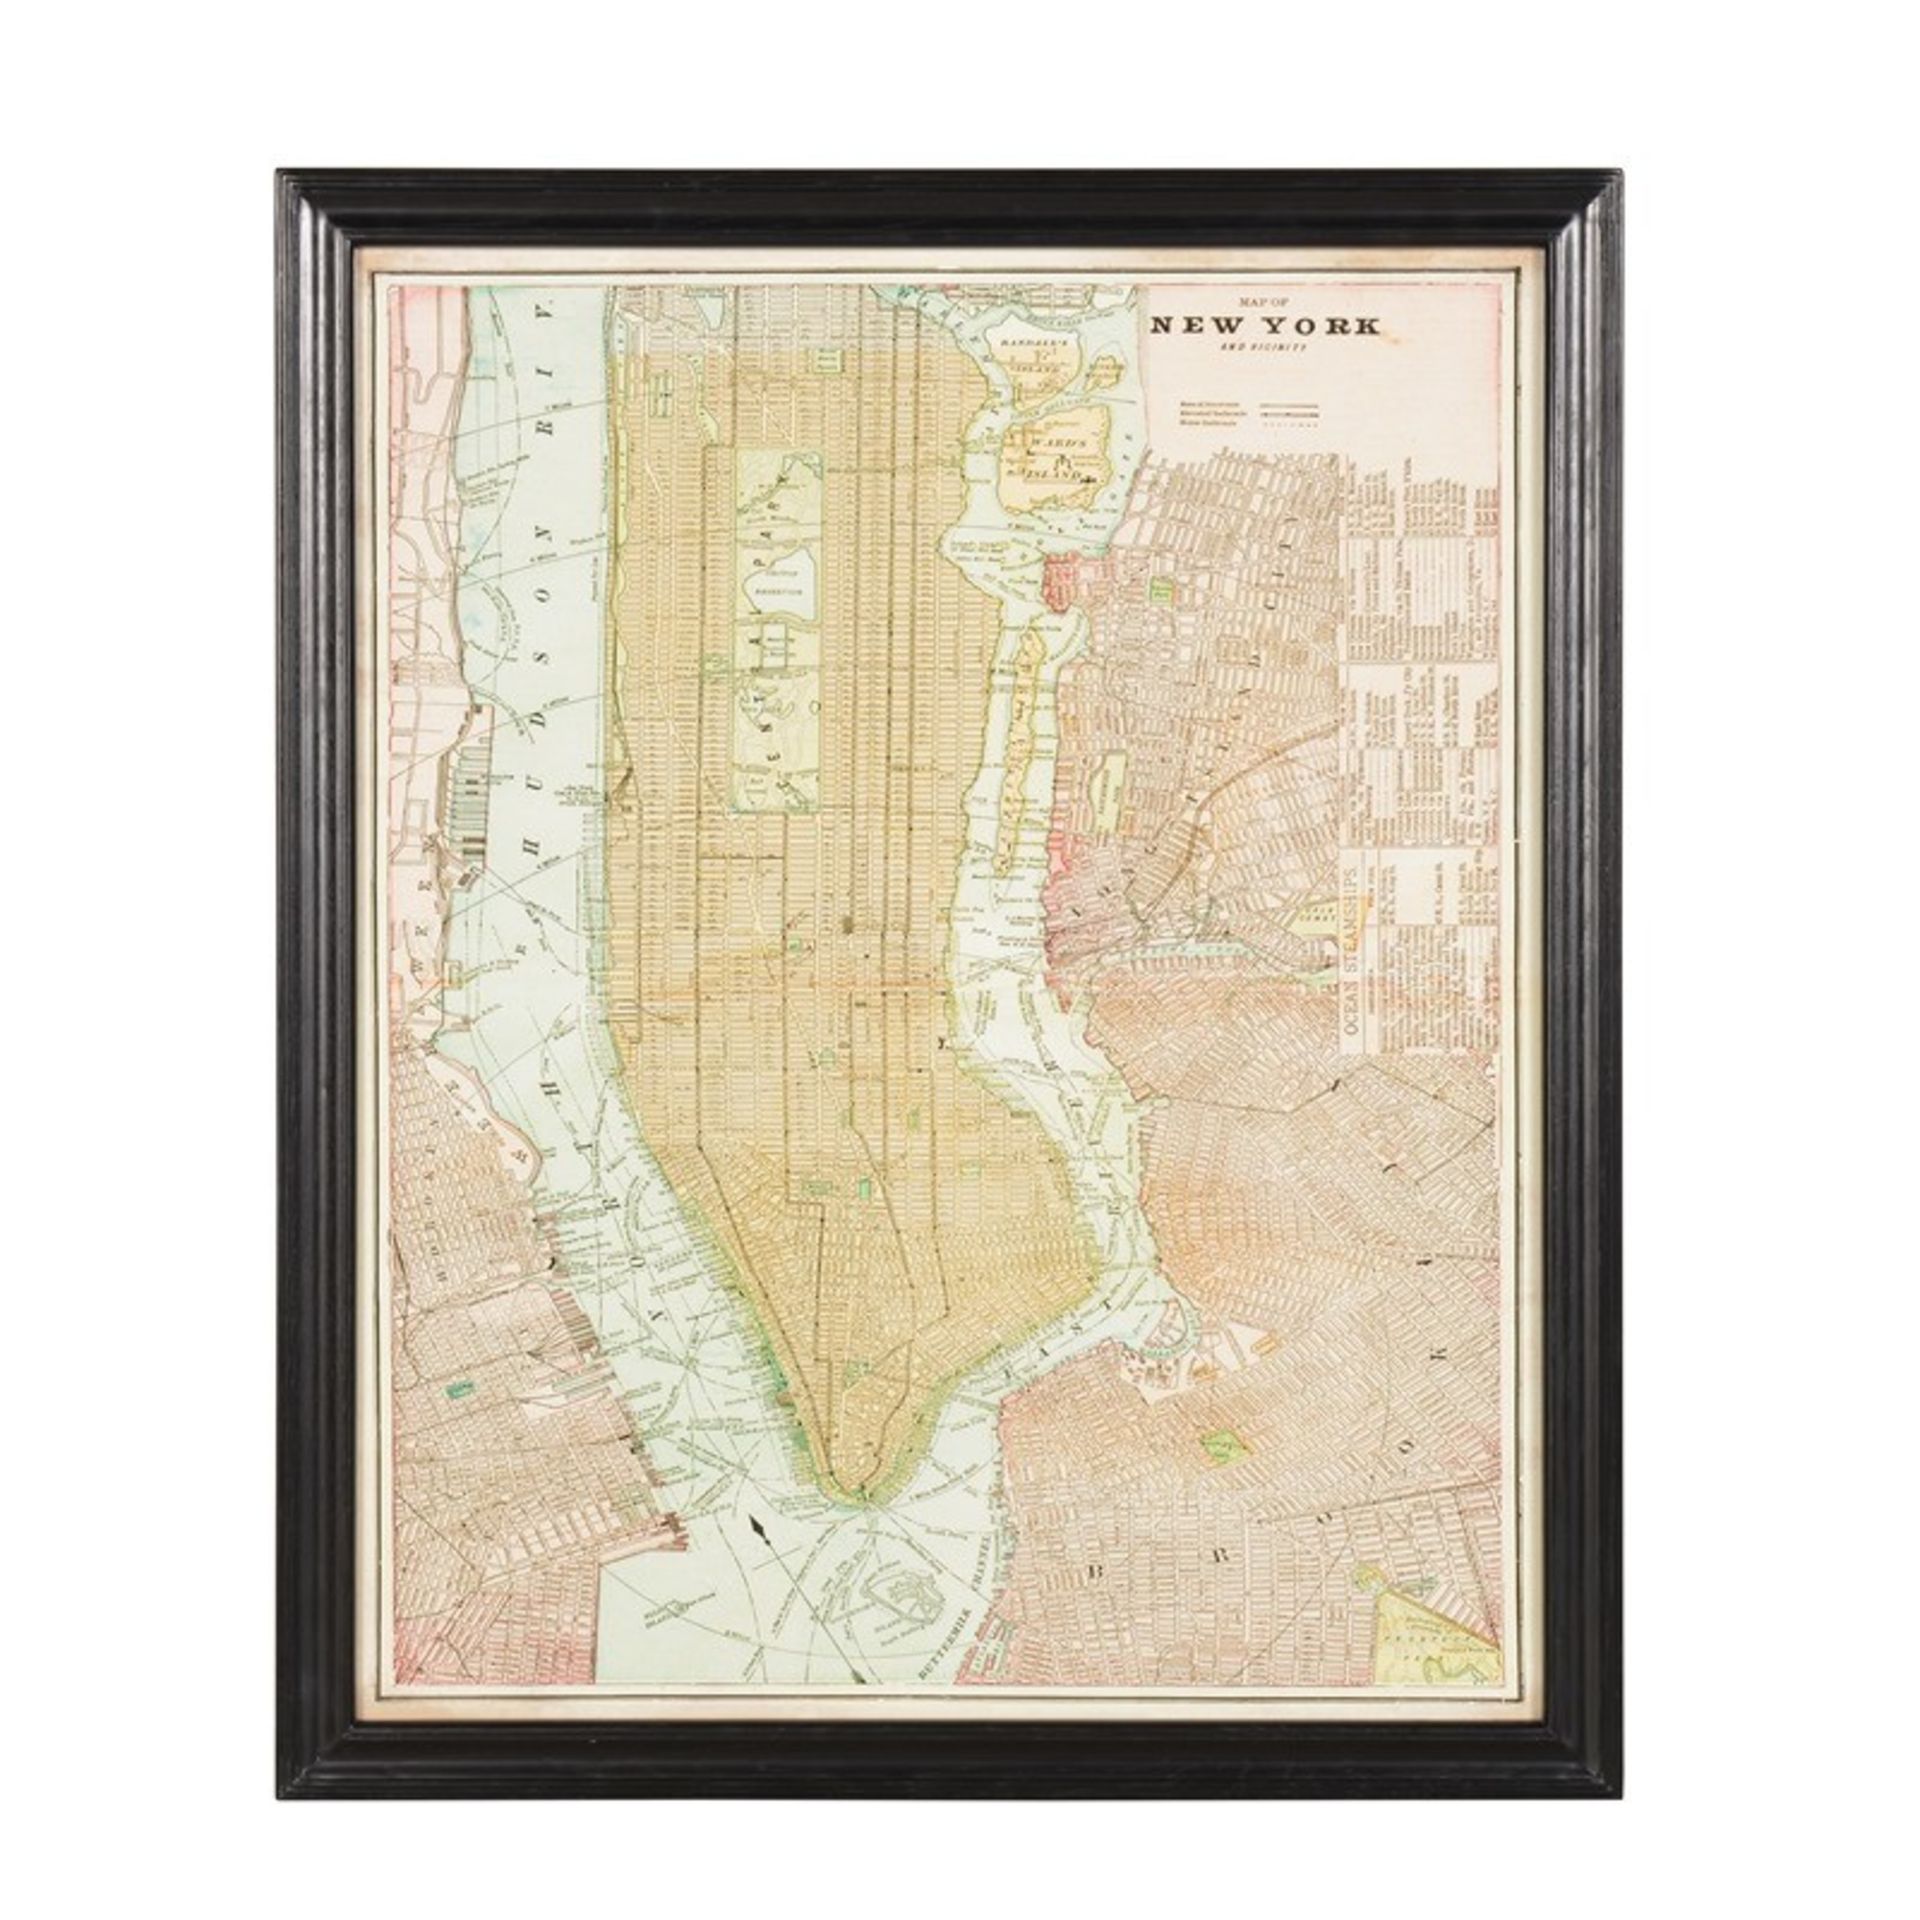 Capital Map New York These Unframed City Maps Pay Homage To Each City’s History And The Life Stories - Bild 2 aus 2